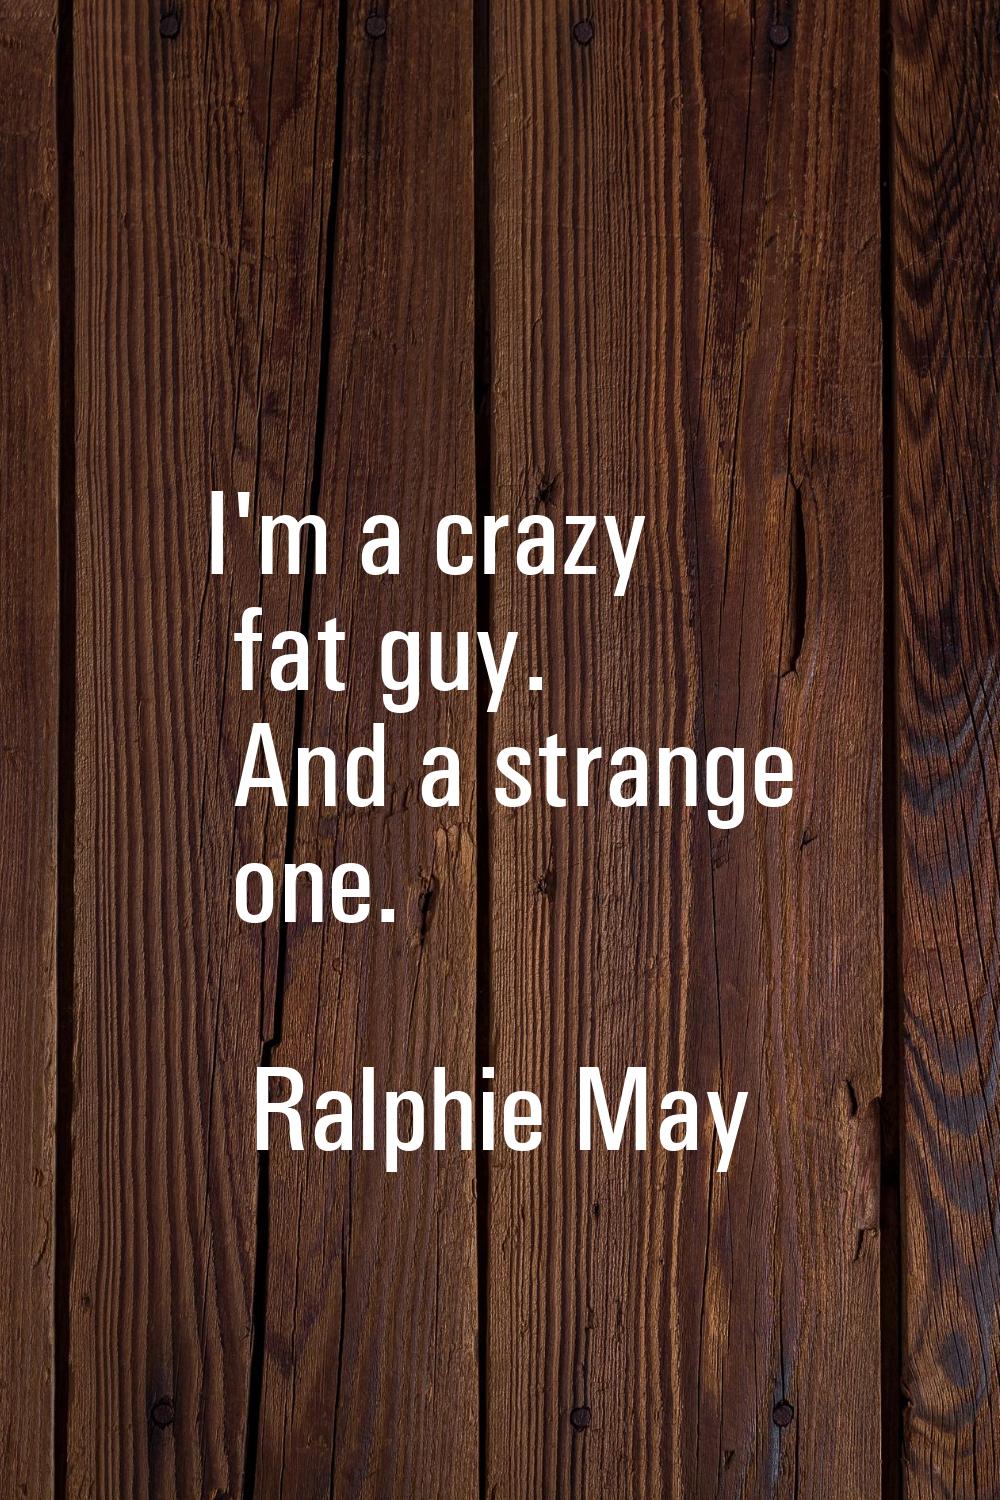 I'm a crazy fat guy. And a strange one.